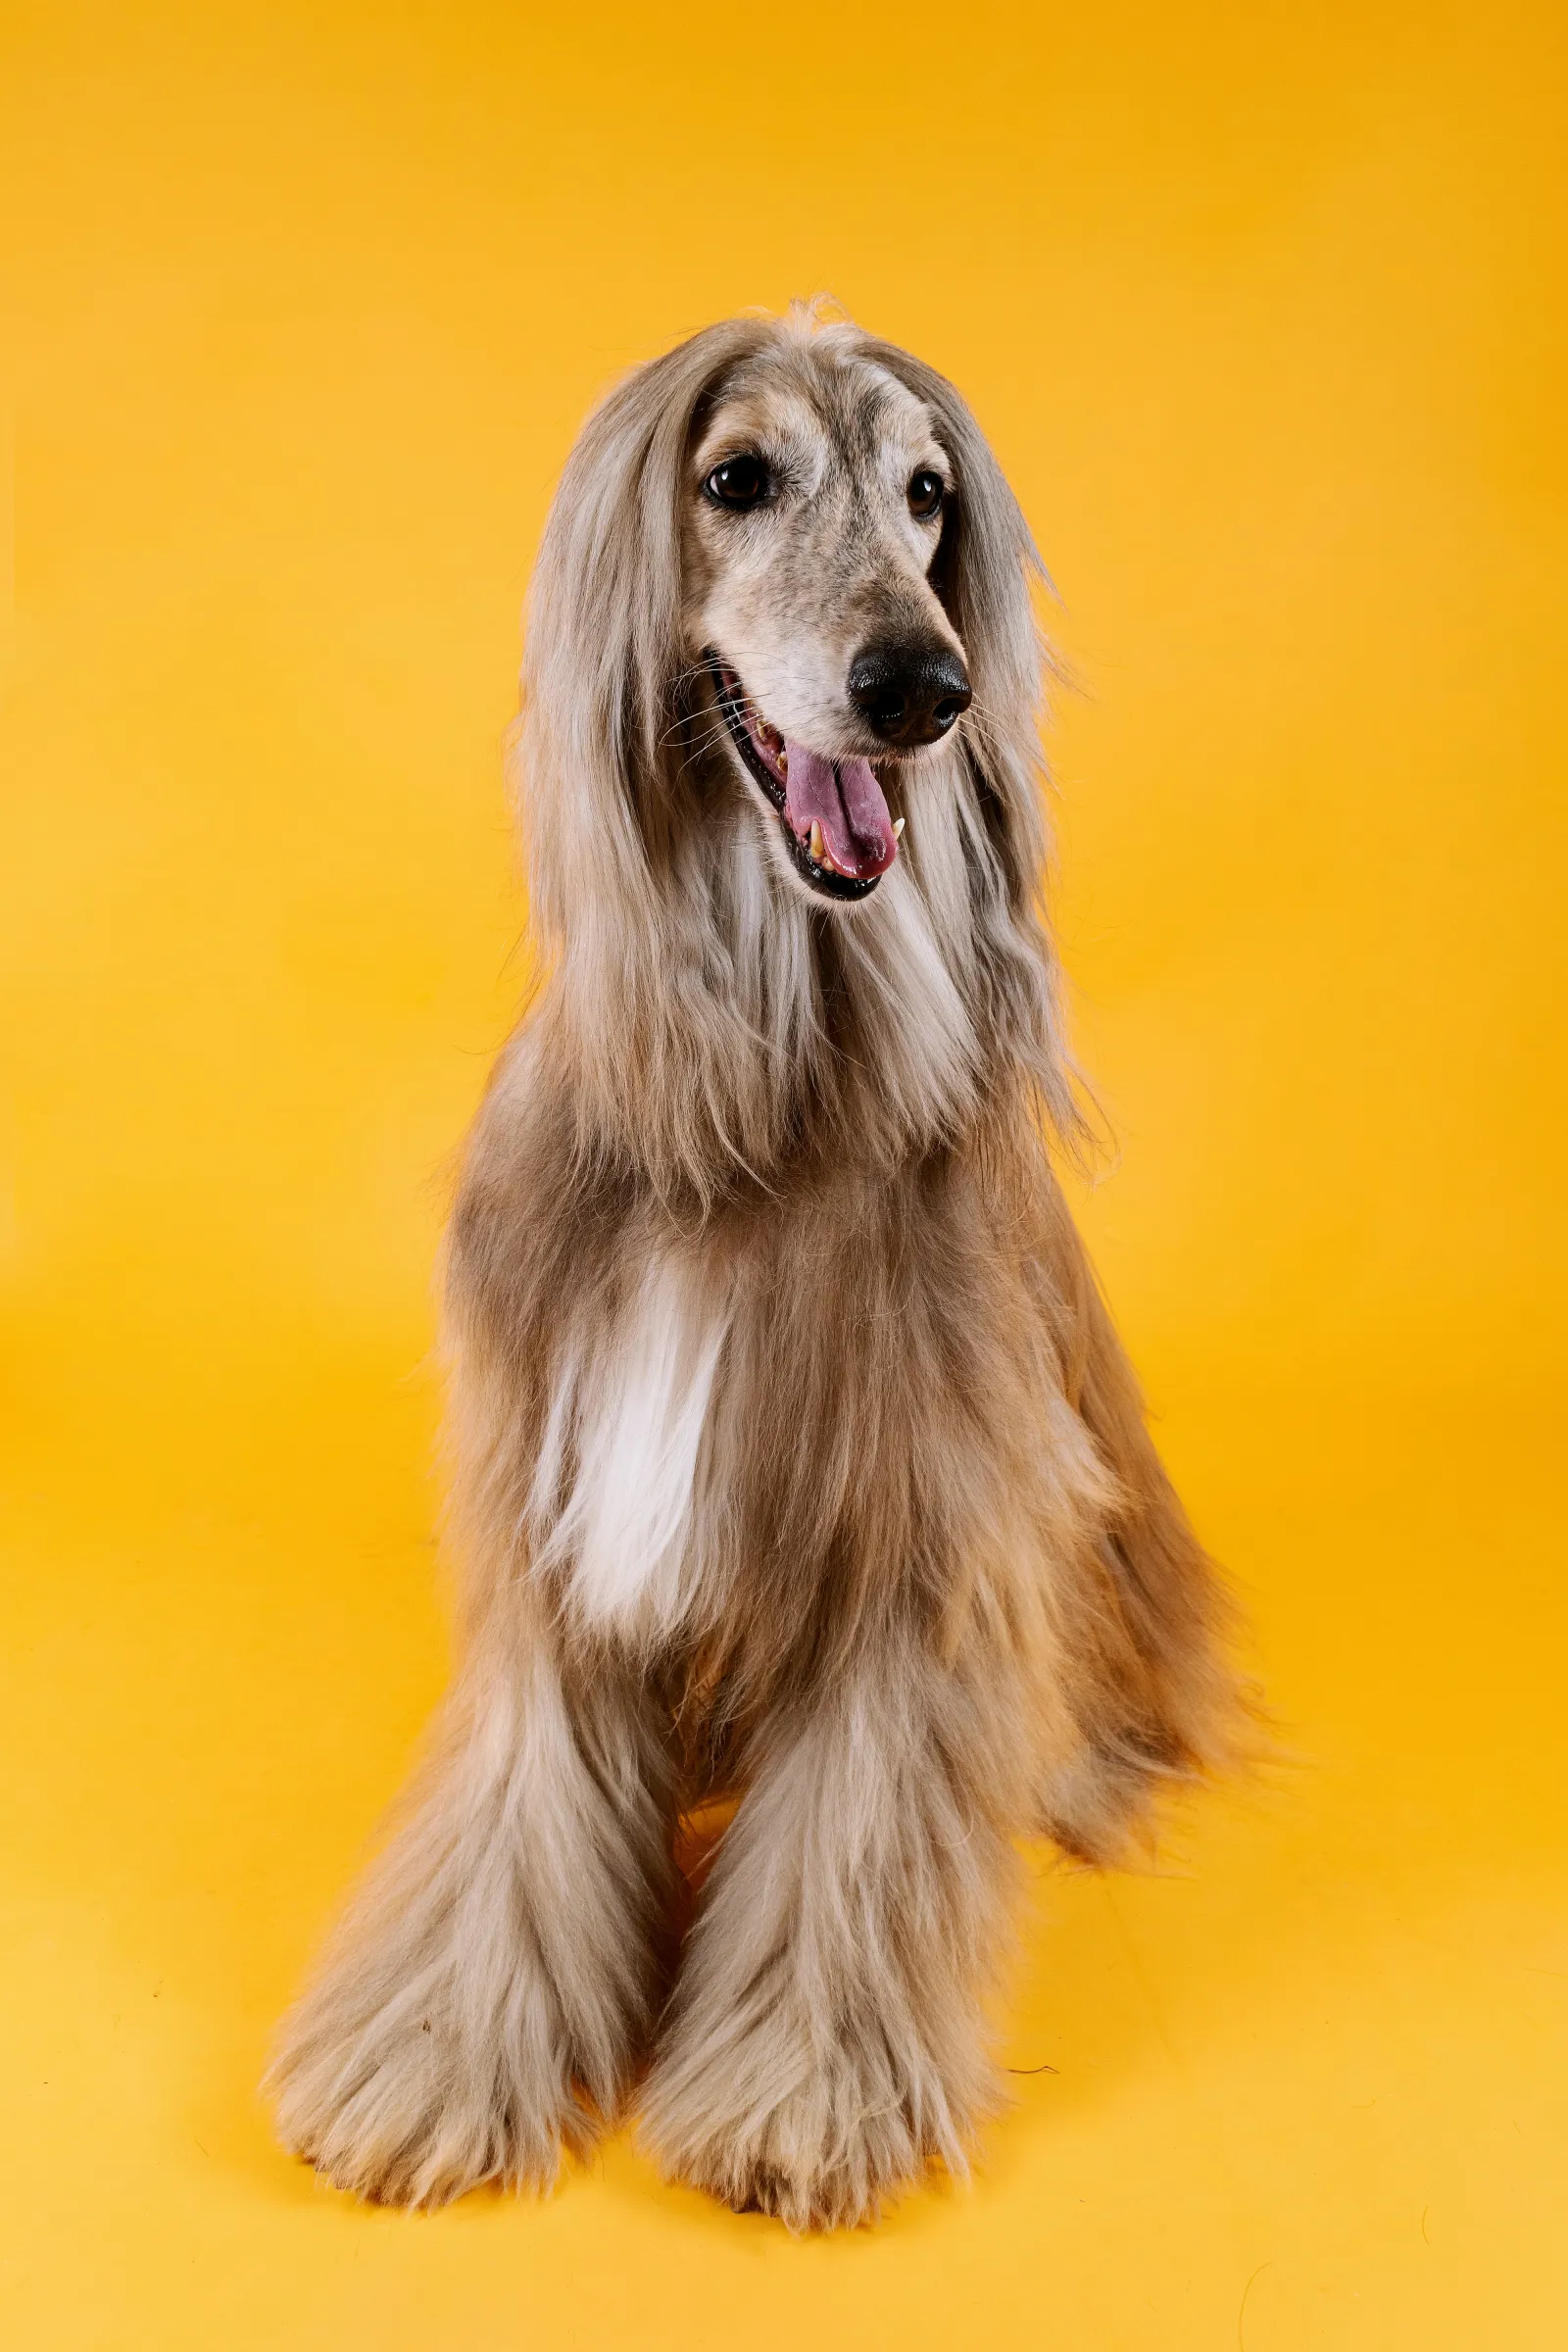 an Afghan hound, a long-haired hypoallergenic dog breed, sitting on a yellow backdrop